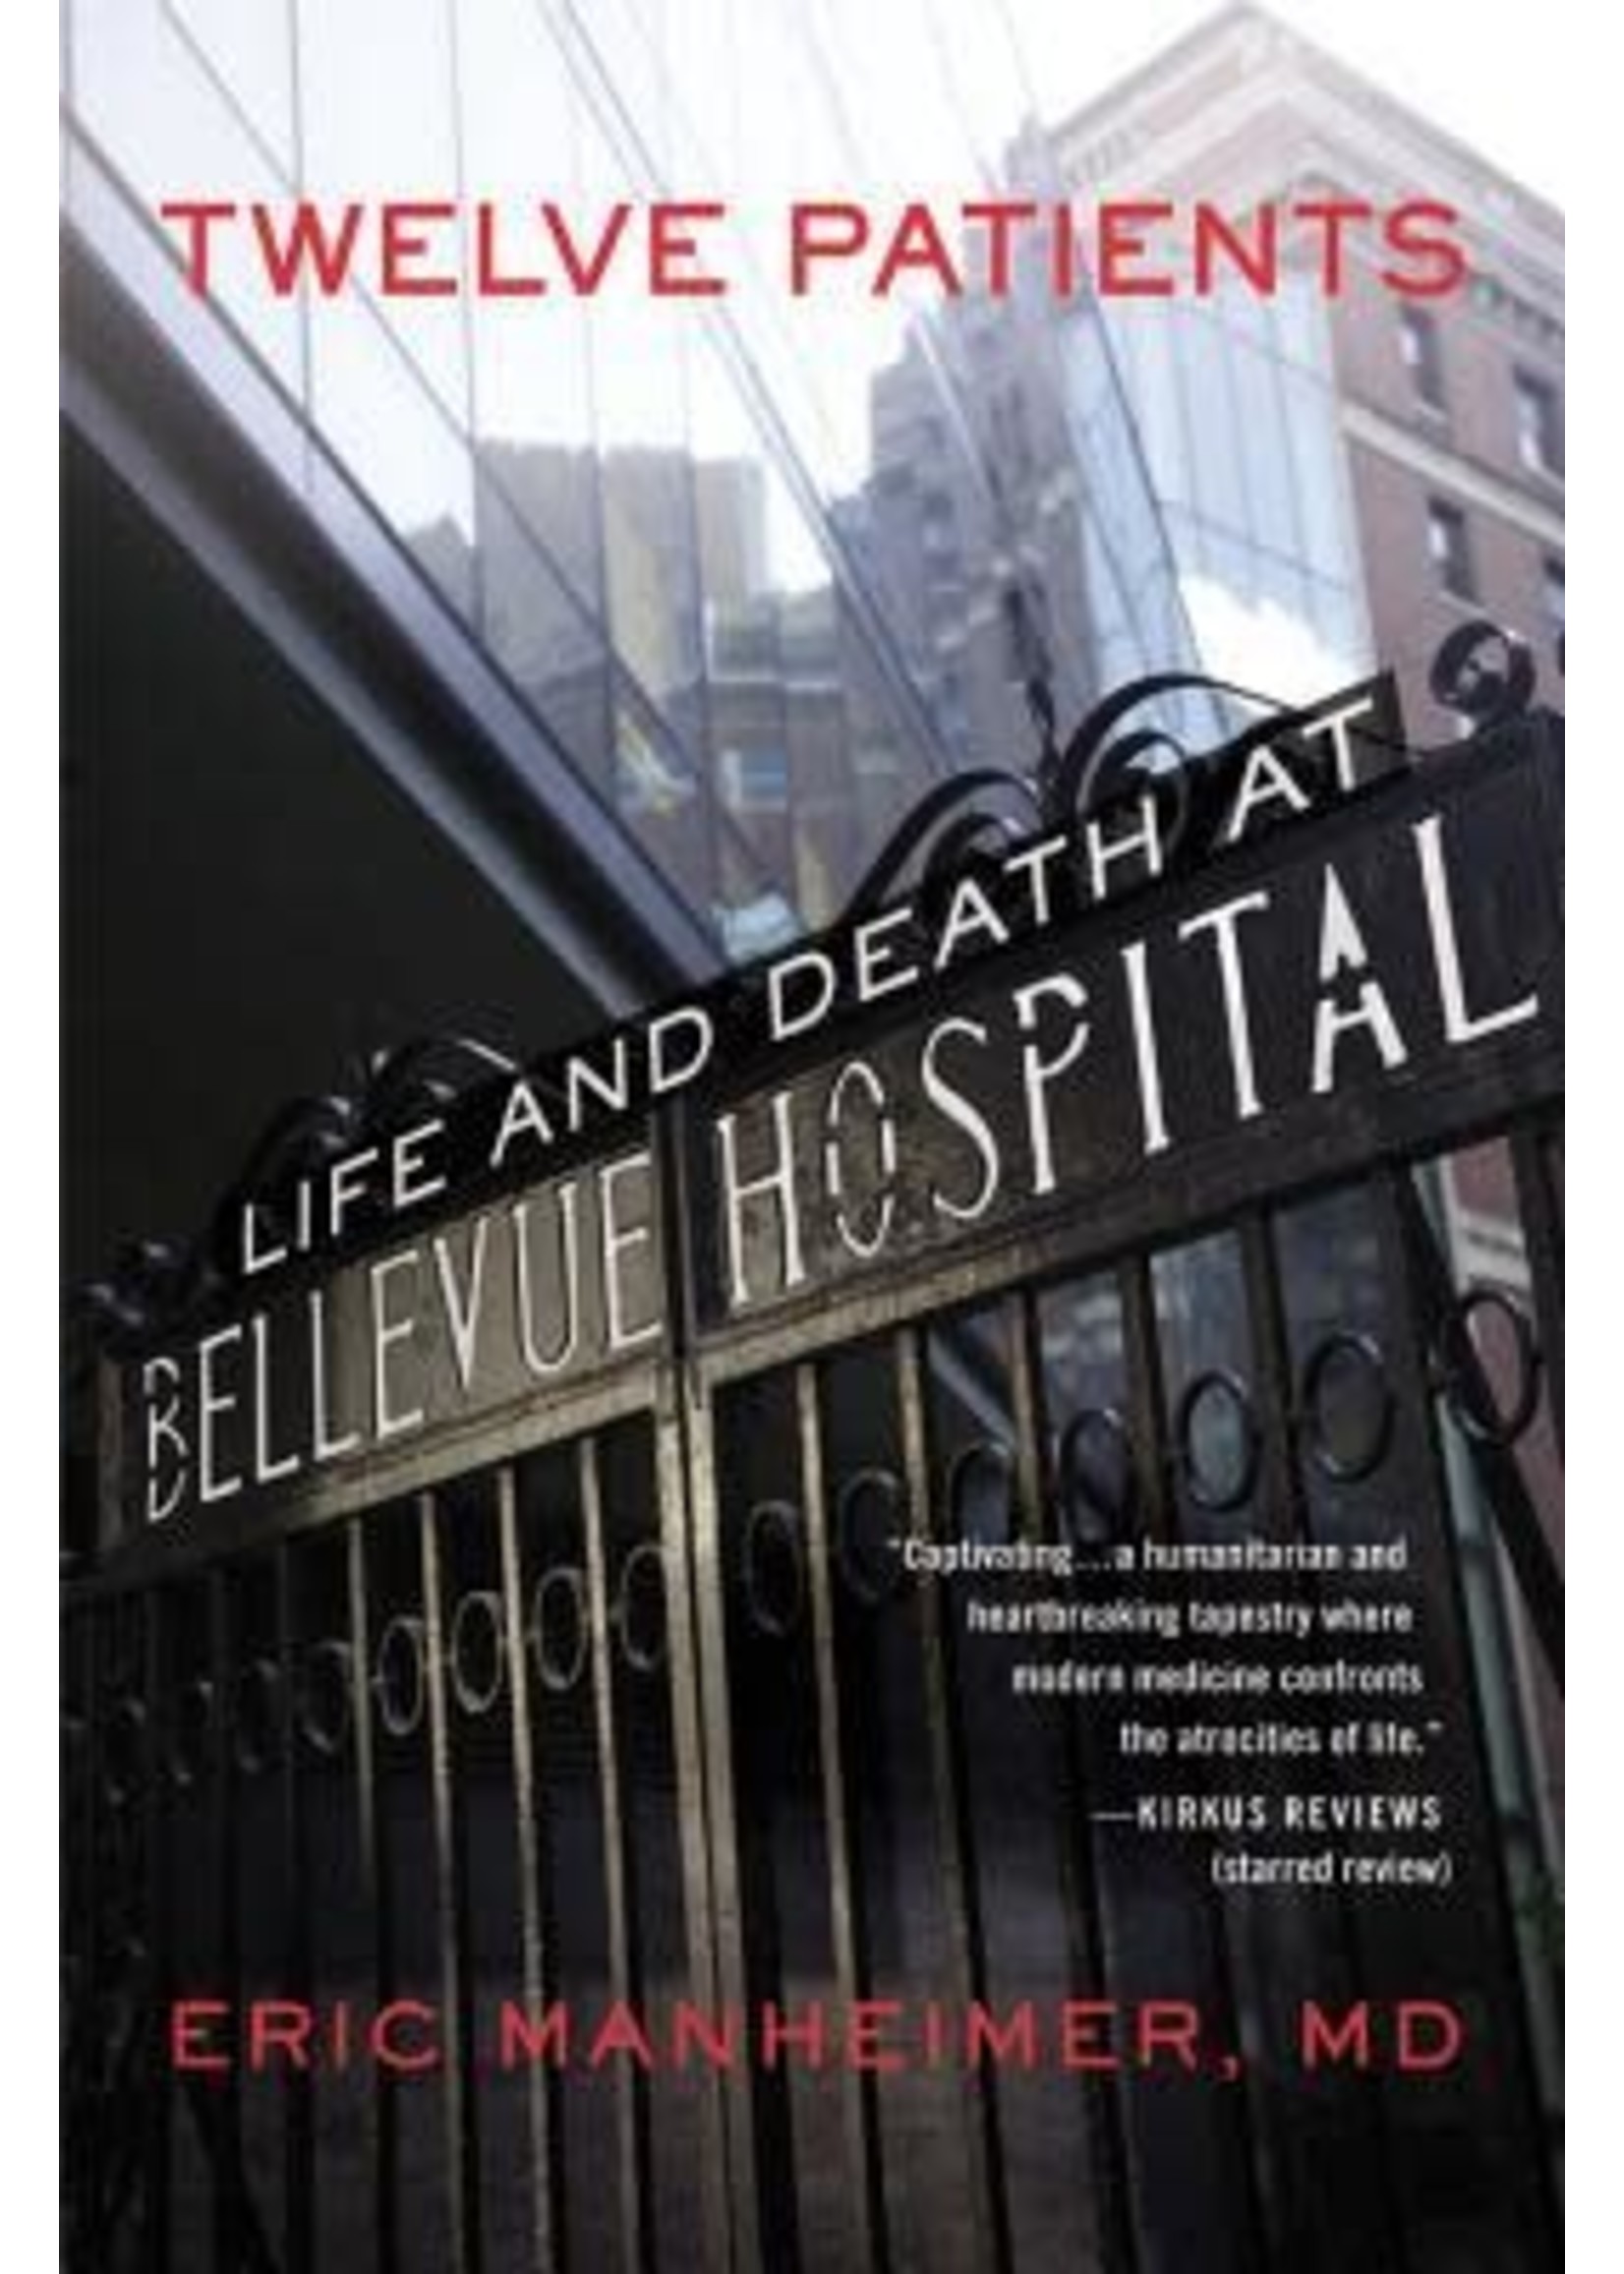 Twelve Patients: Life and Death at Bellevue Hospital by Eric Manheimer